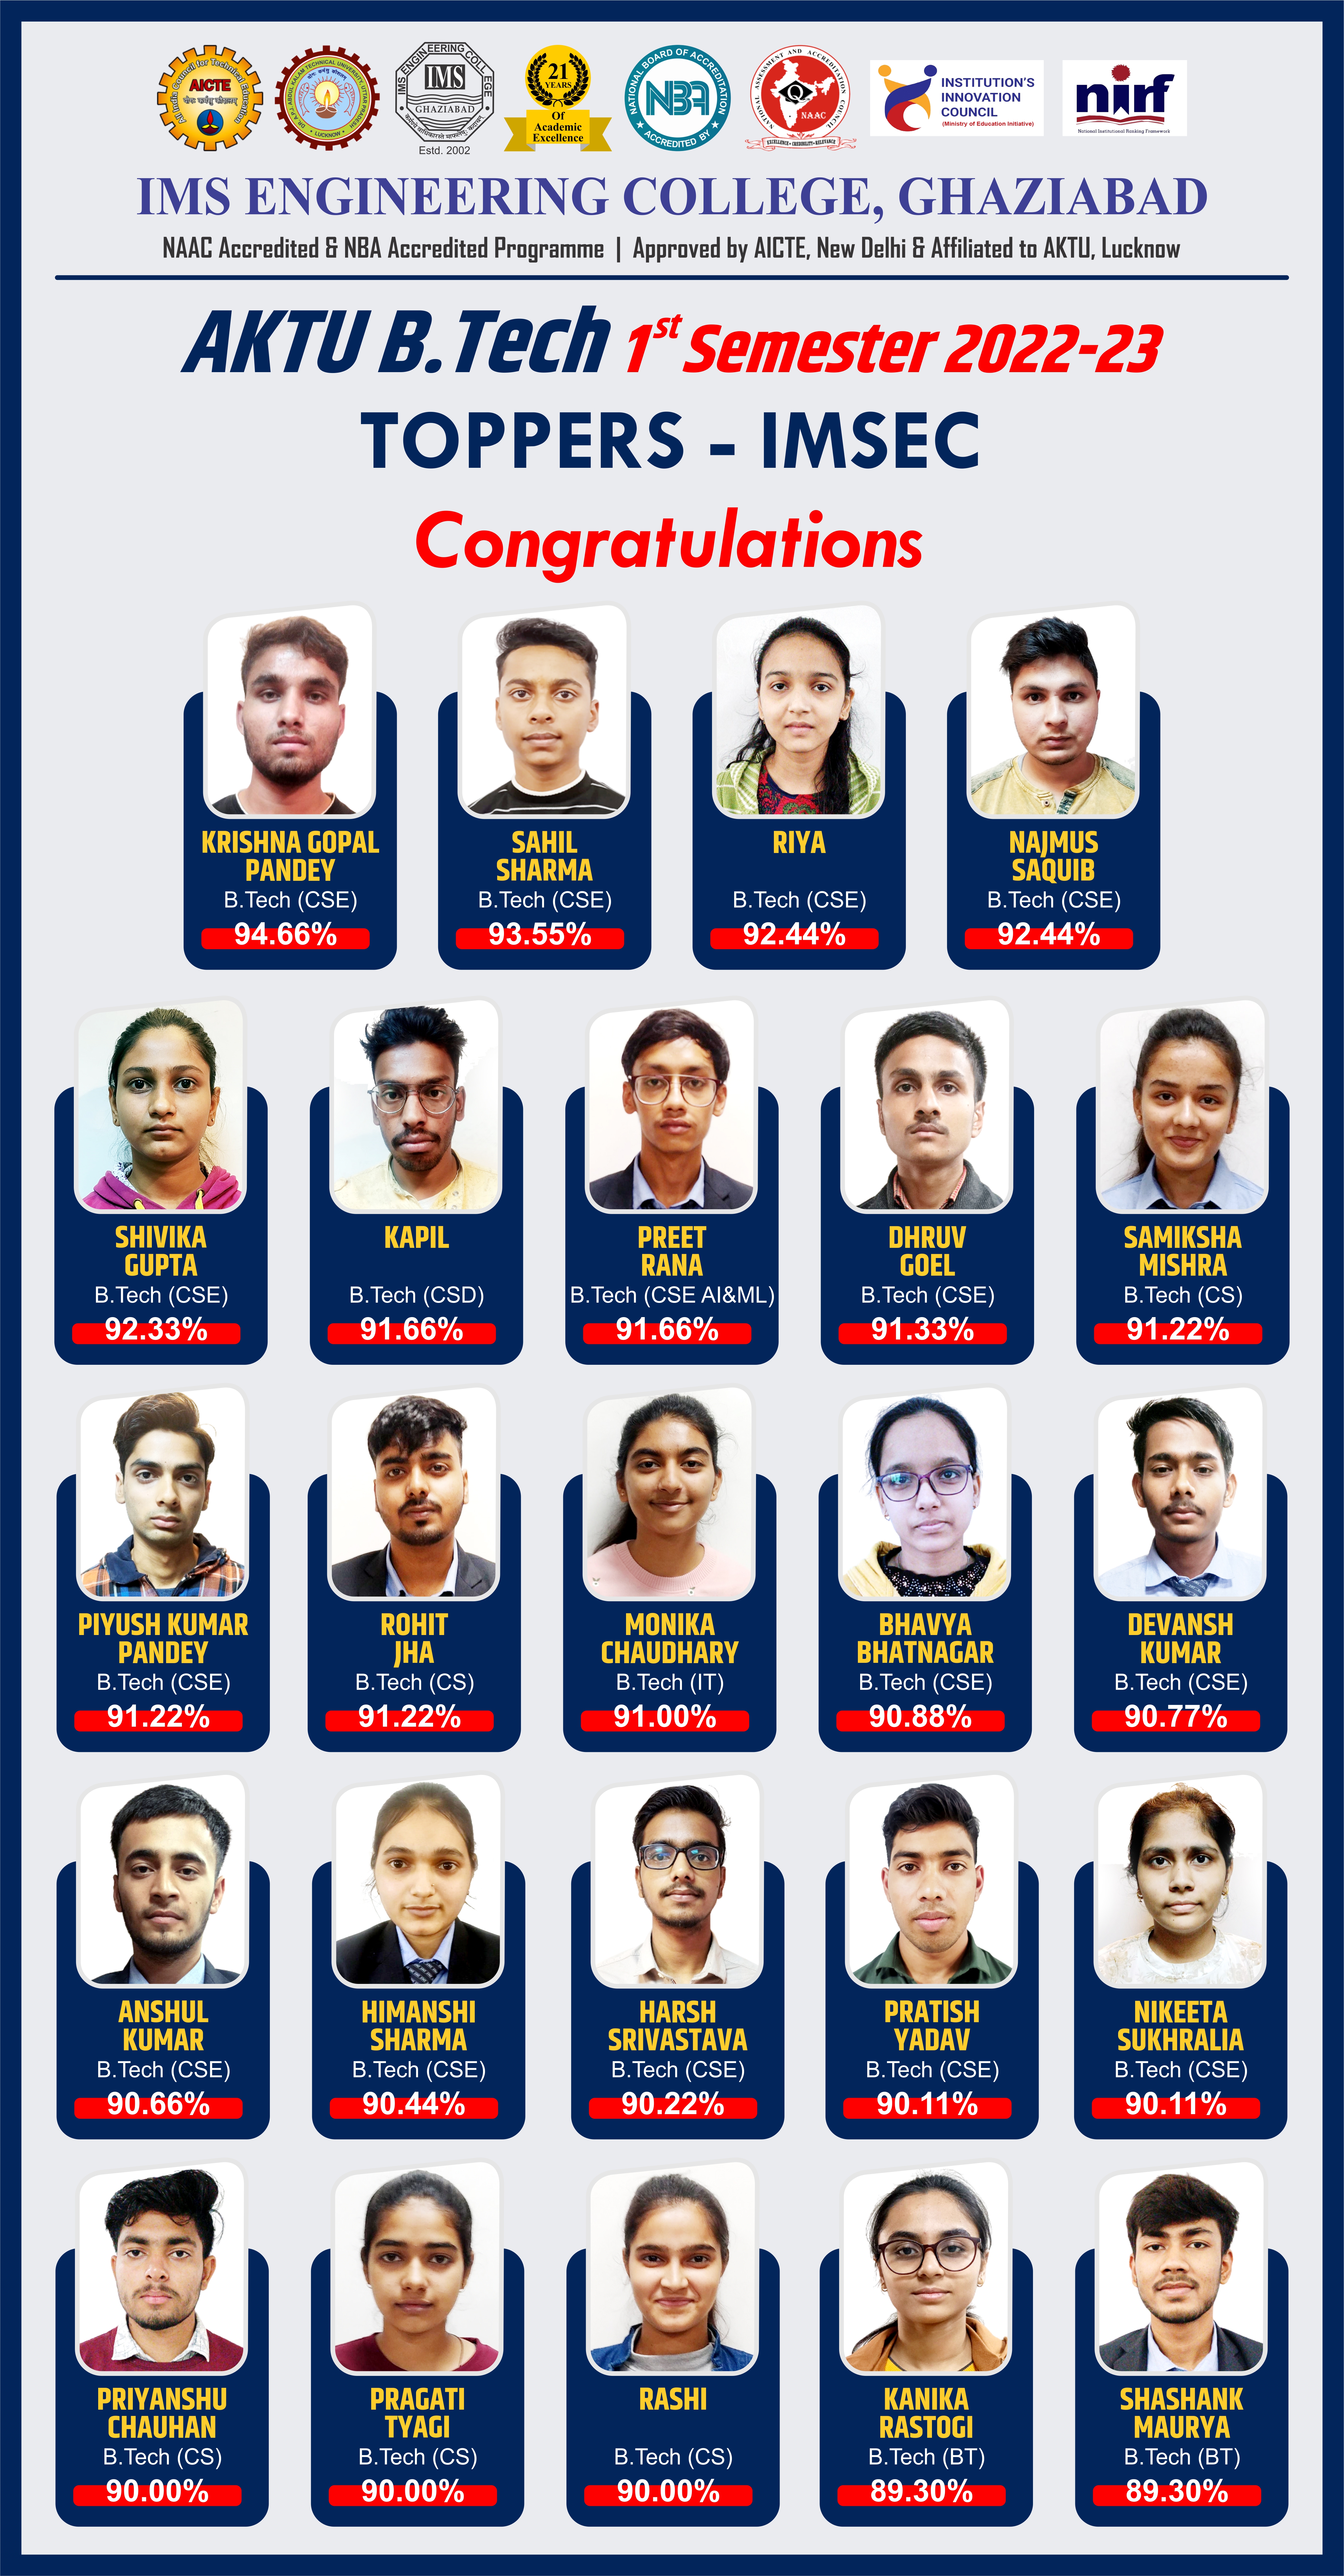 Achievers of our university Examination-B.Tech 1st Semester 2022-23 Examination results